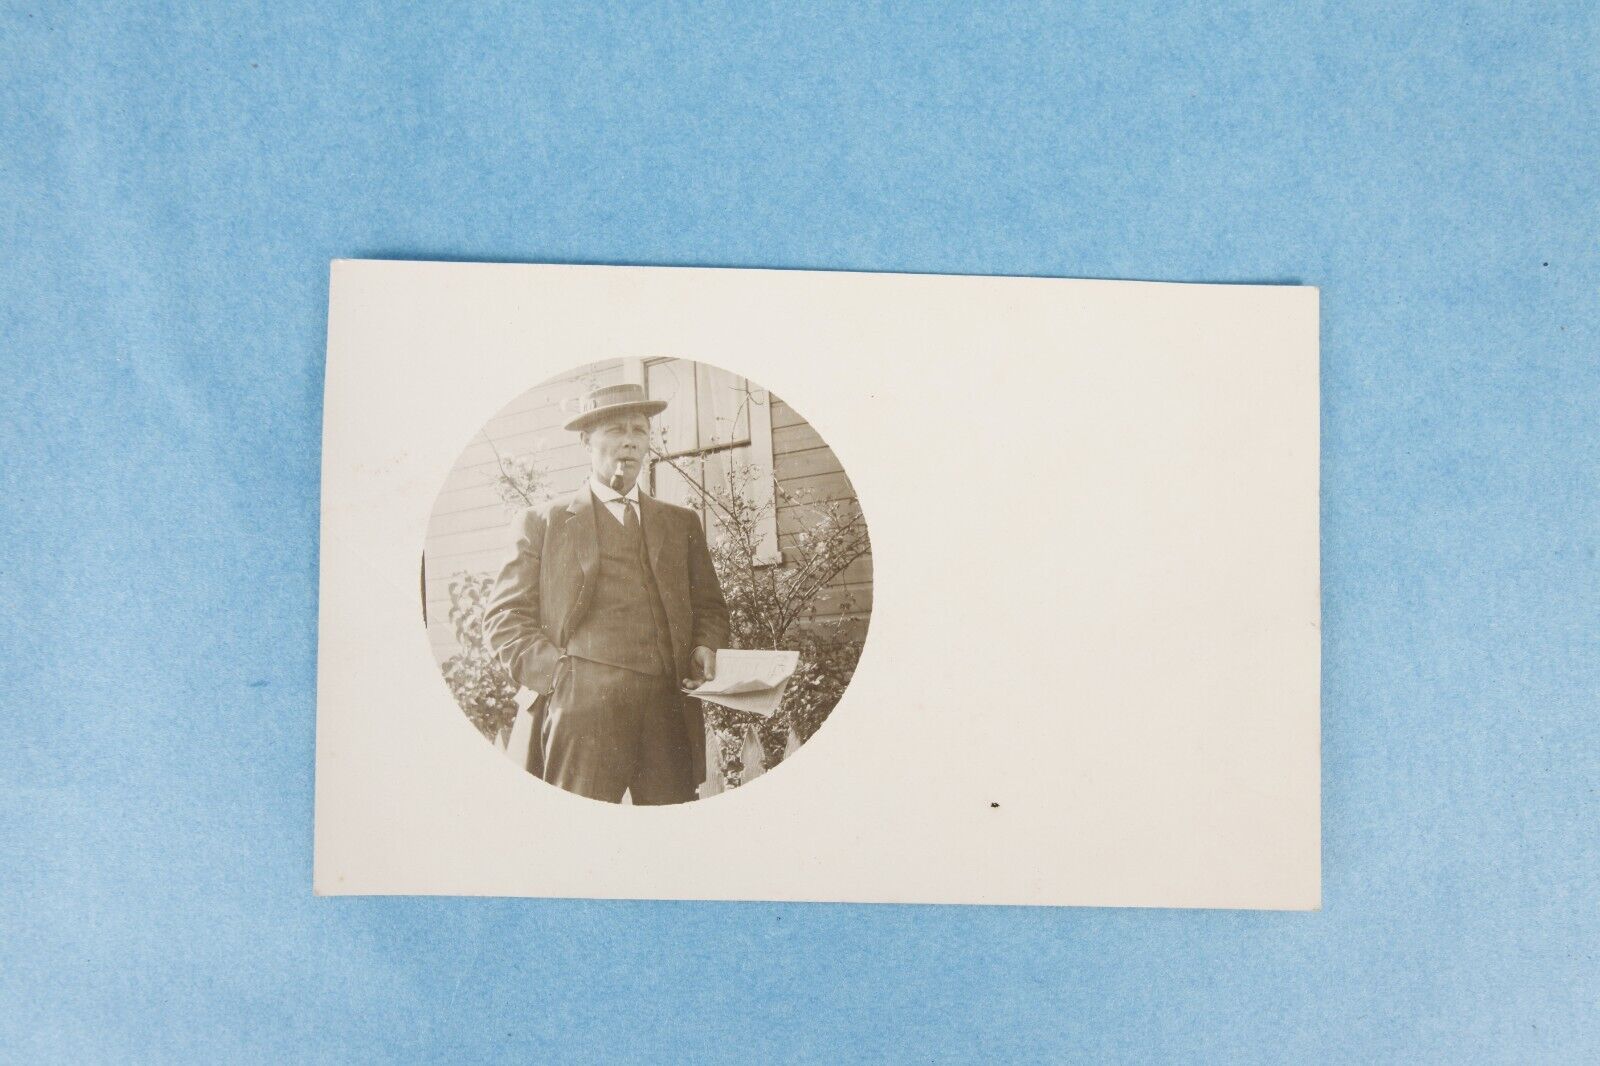 VINTAGE EARLY 1900s RPPC REAL PHOTO POSTCARD SIG ECKHOLM SMOKING A PIPE UNPOSTED